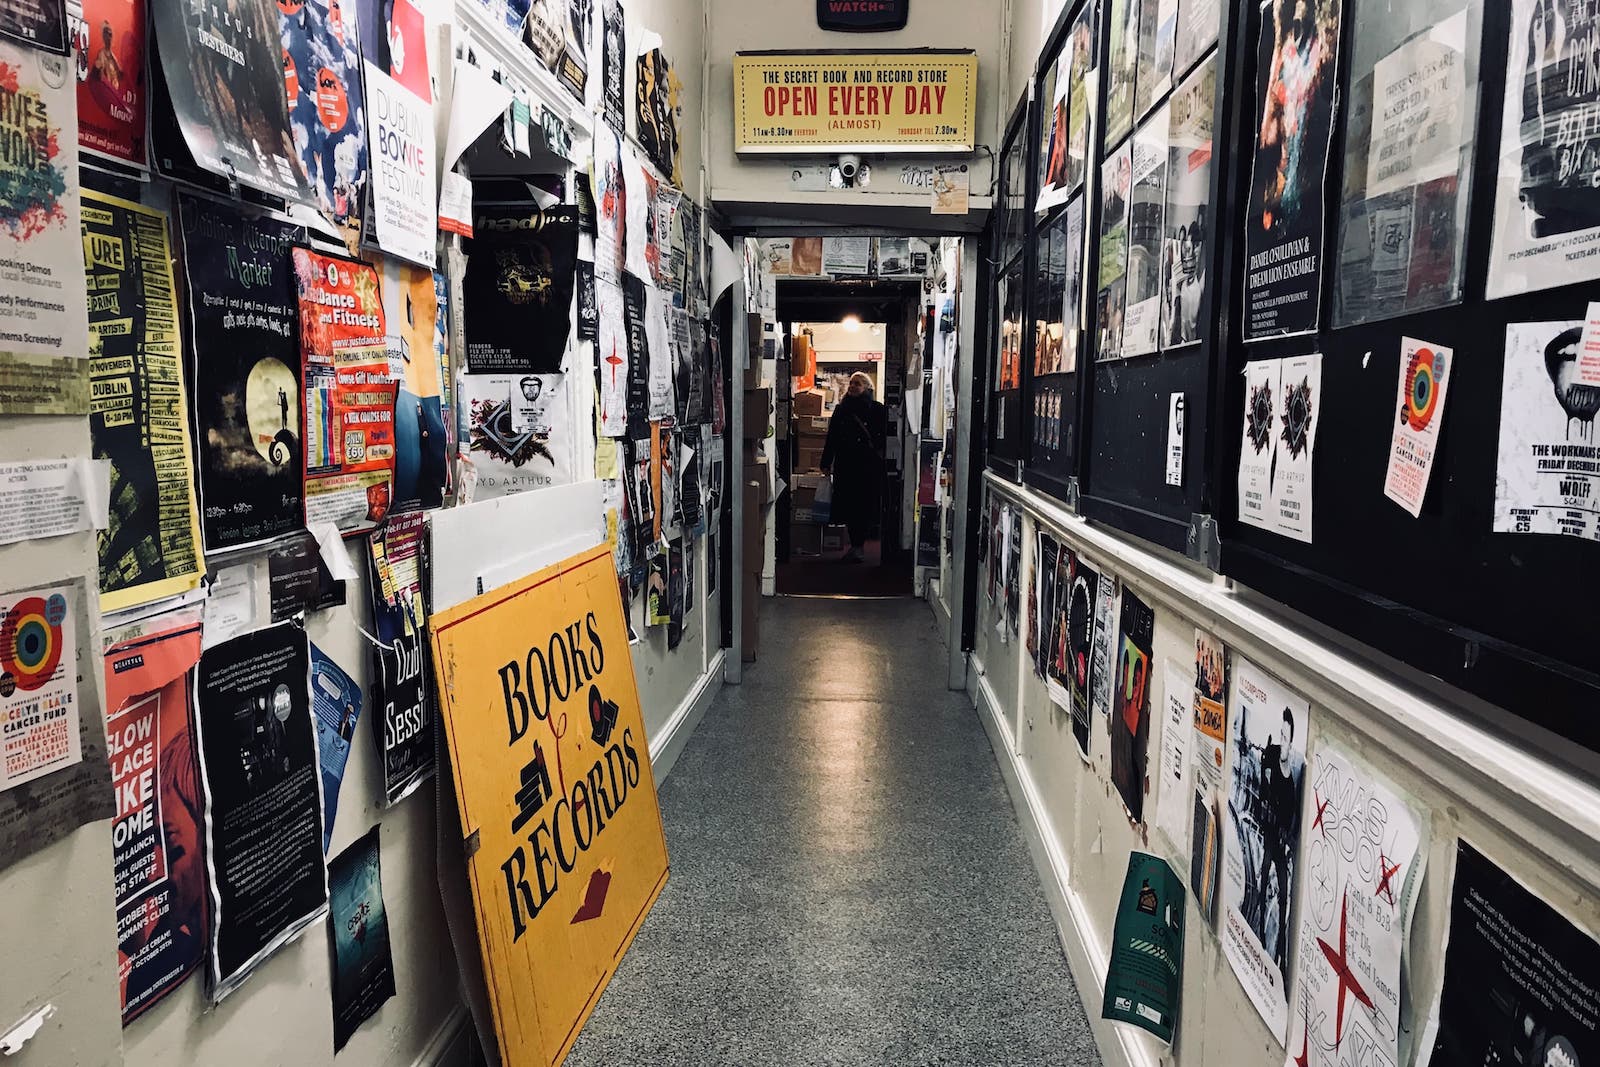 A long corridor with walls covered in posters and a bookshop at the end